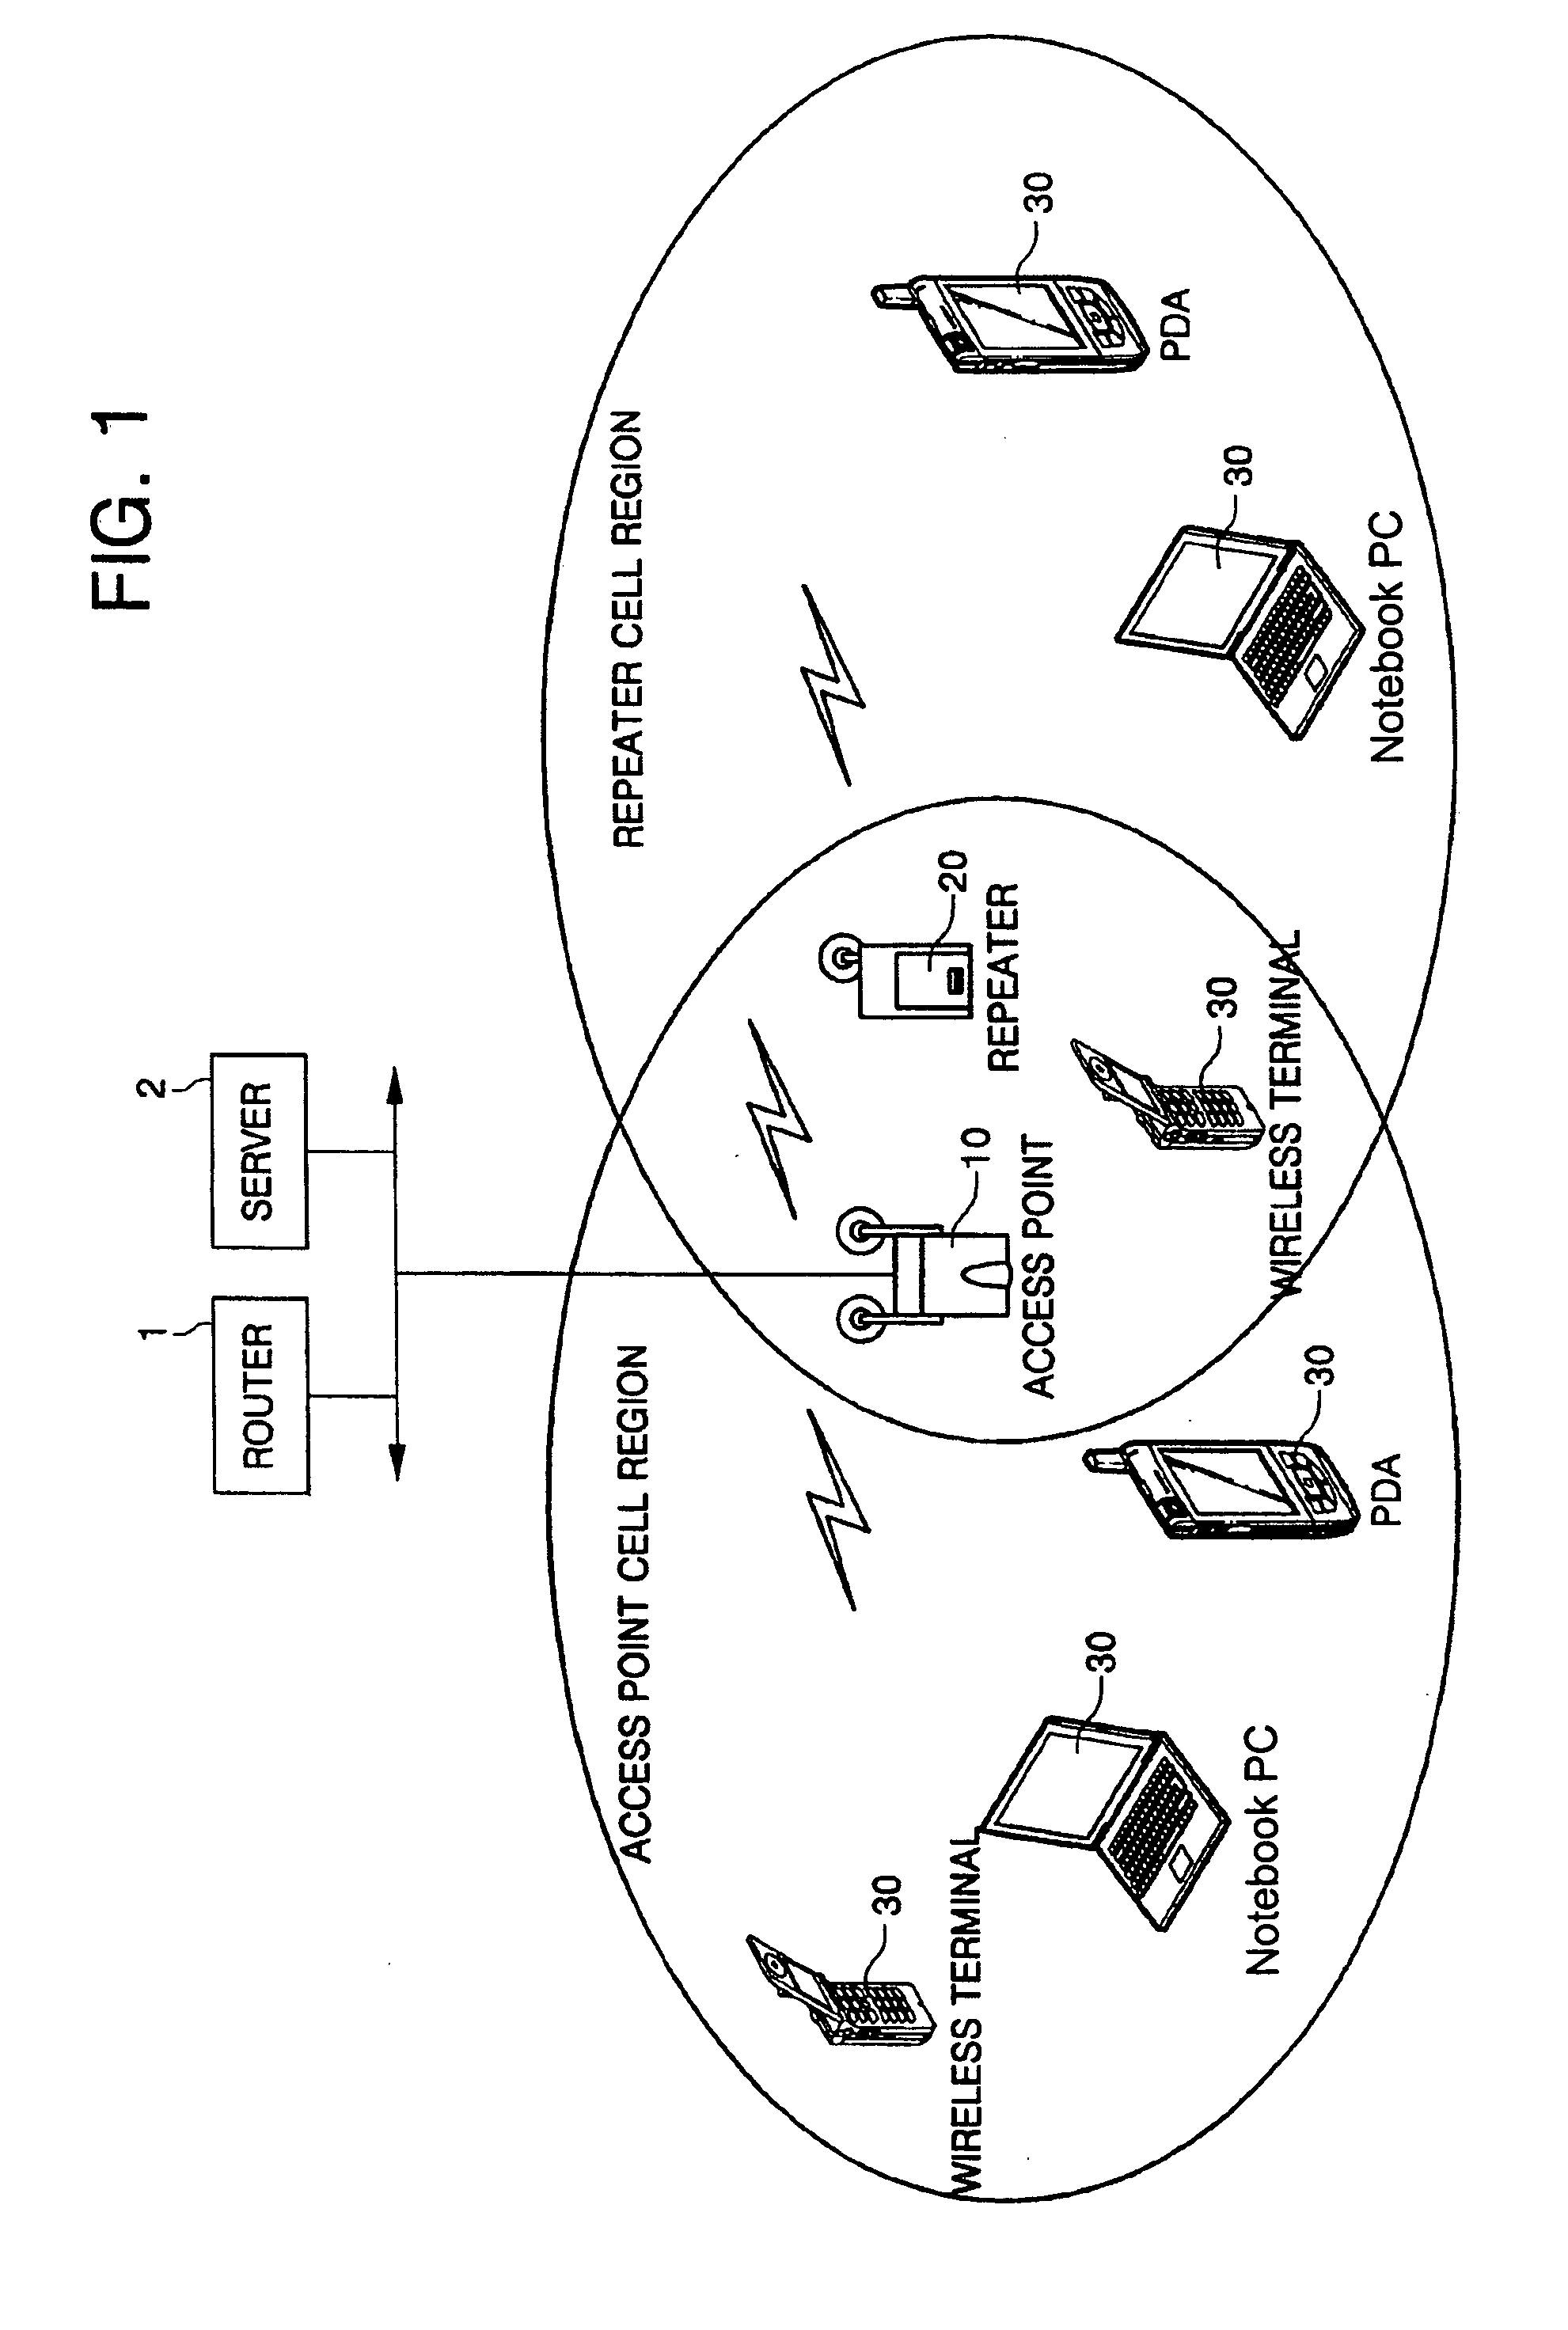 Wireless distribution system (WDS) repeater in wireless local area network (WLAN) and its control method